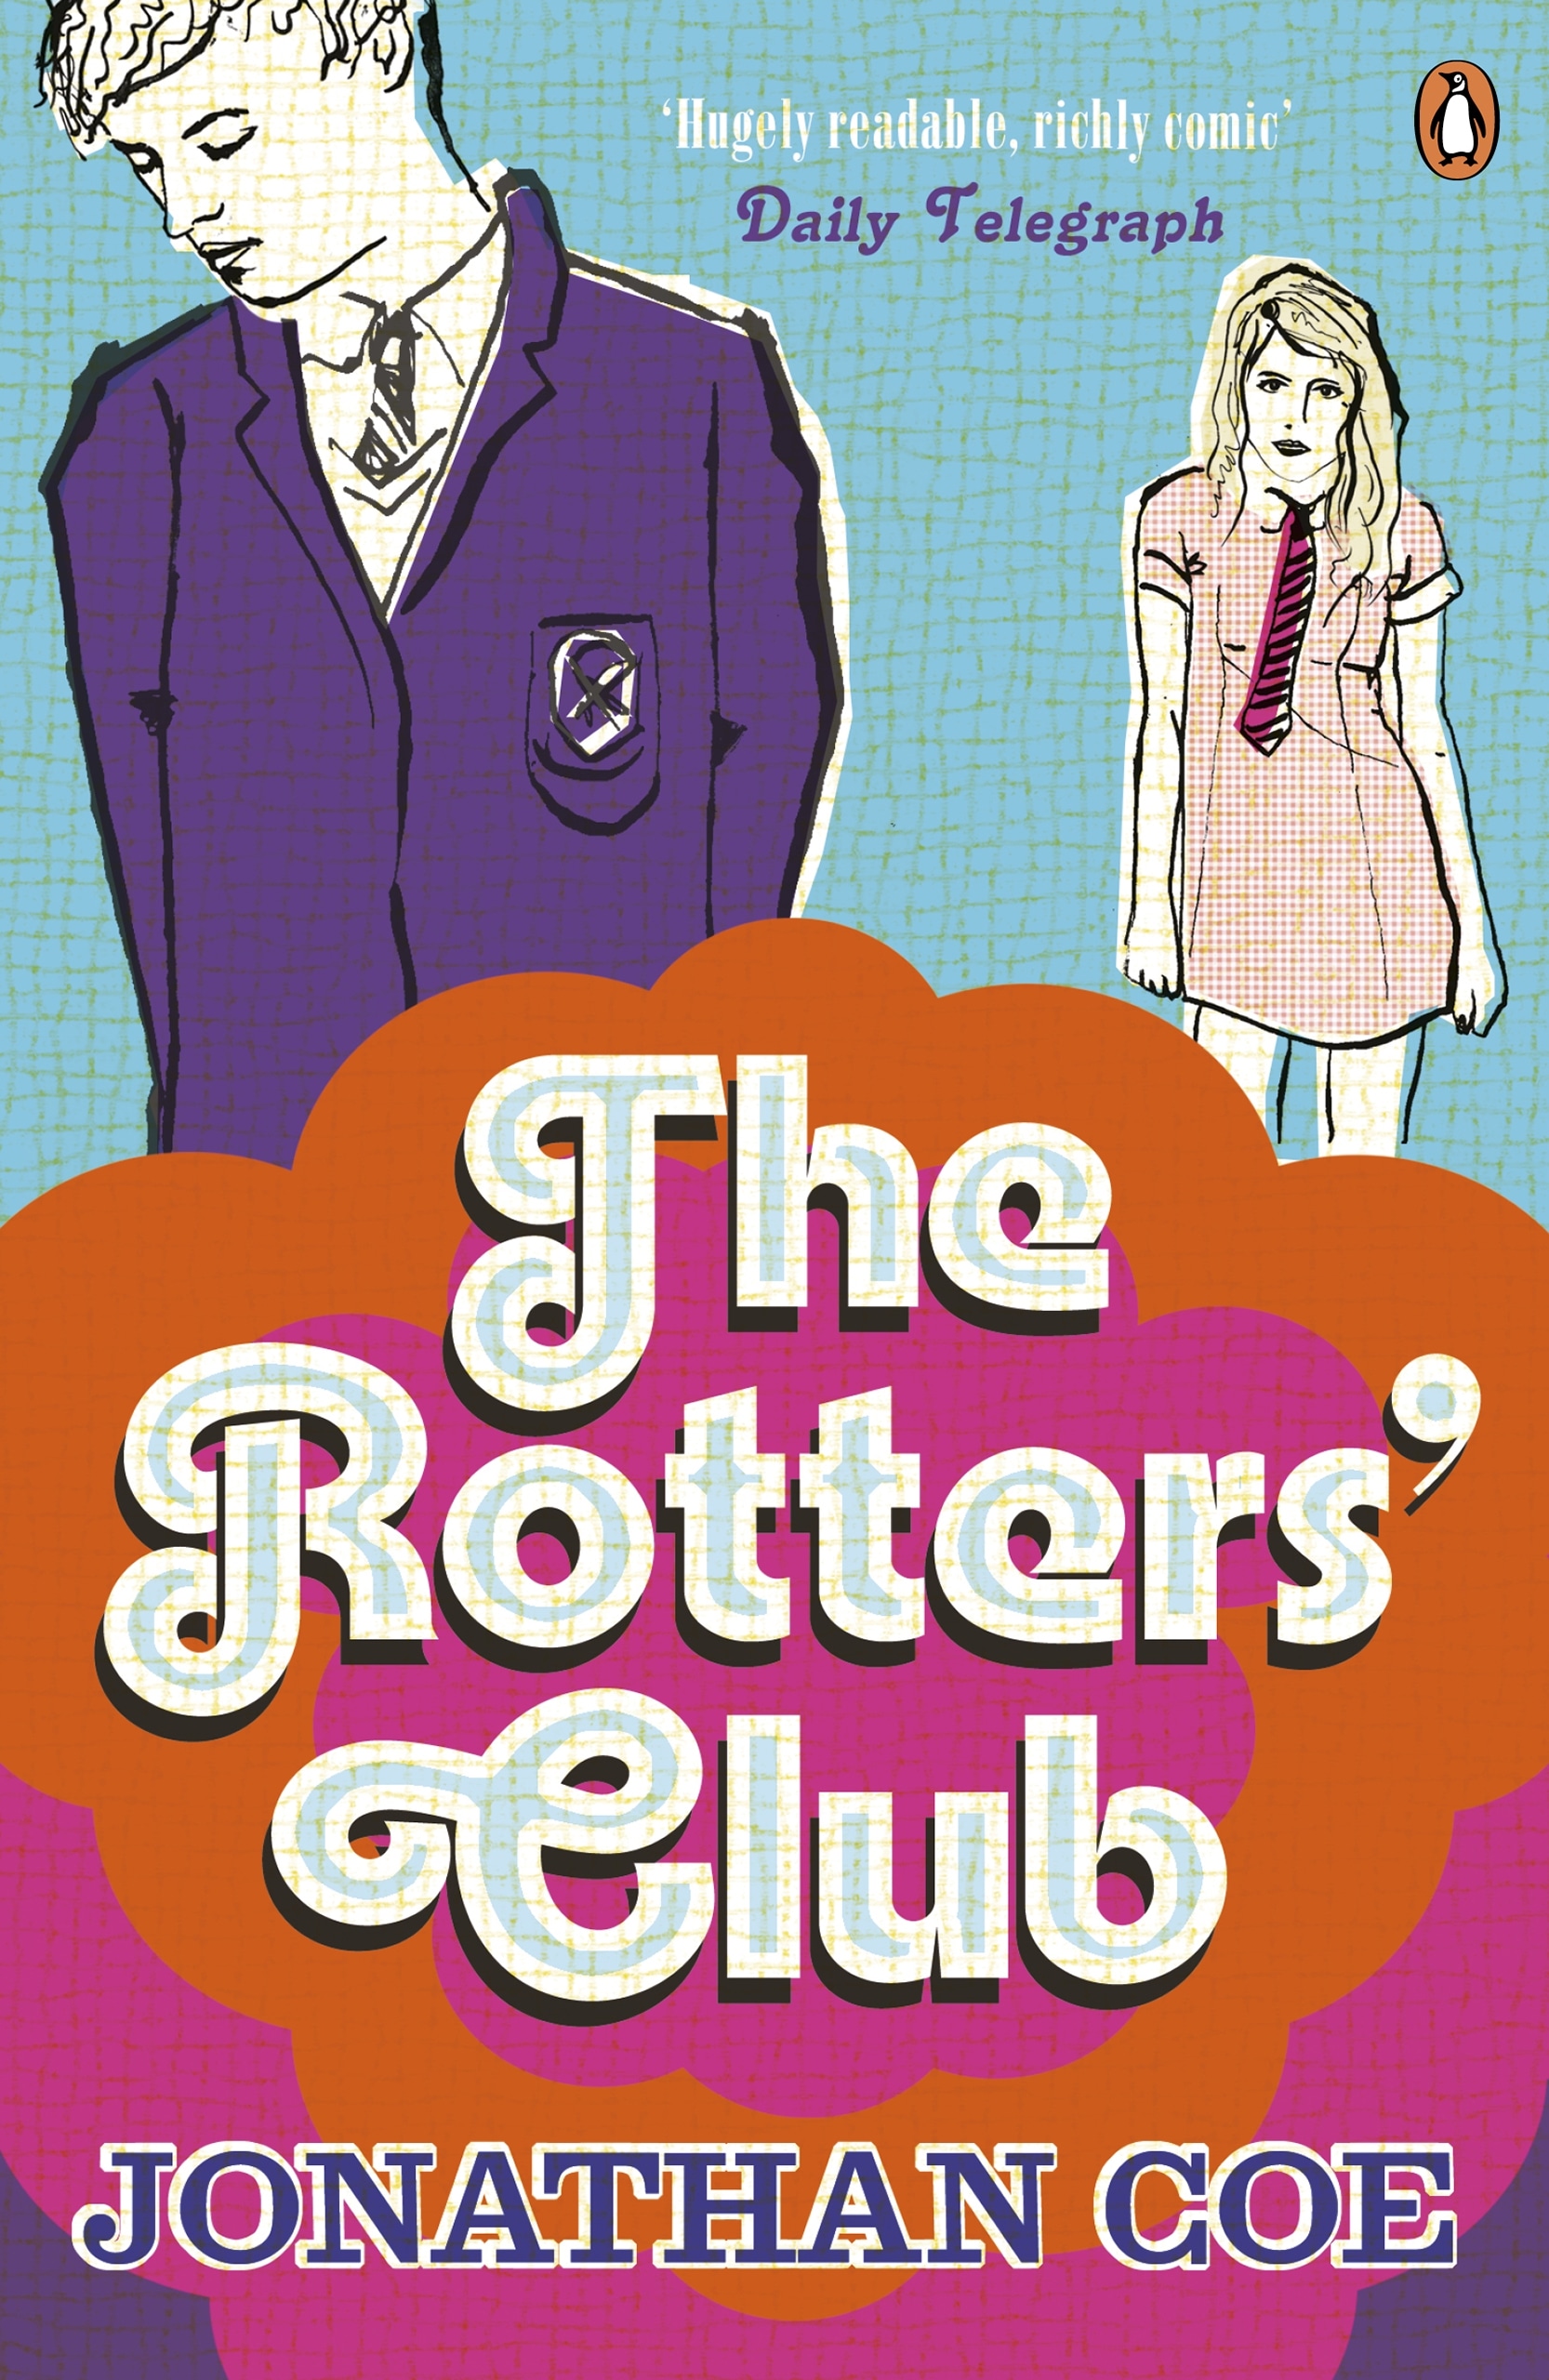 Book “The Rotters' Club” by Jonathan Coe — June 26, 2014